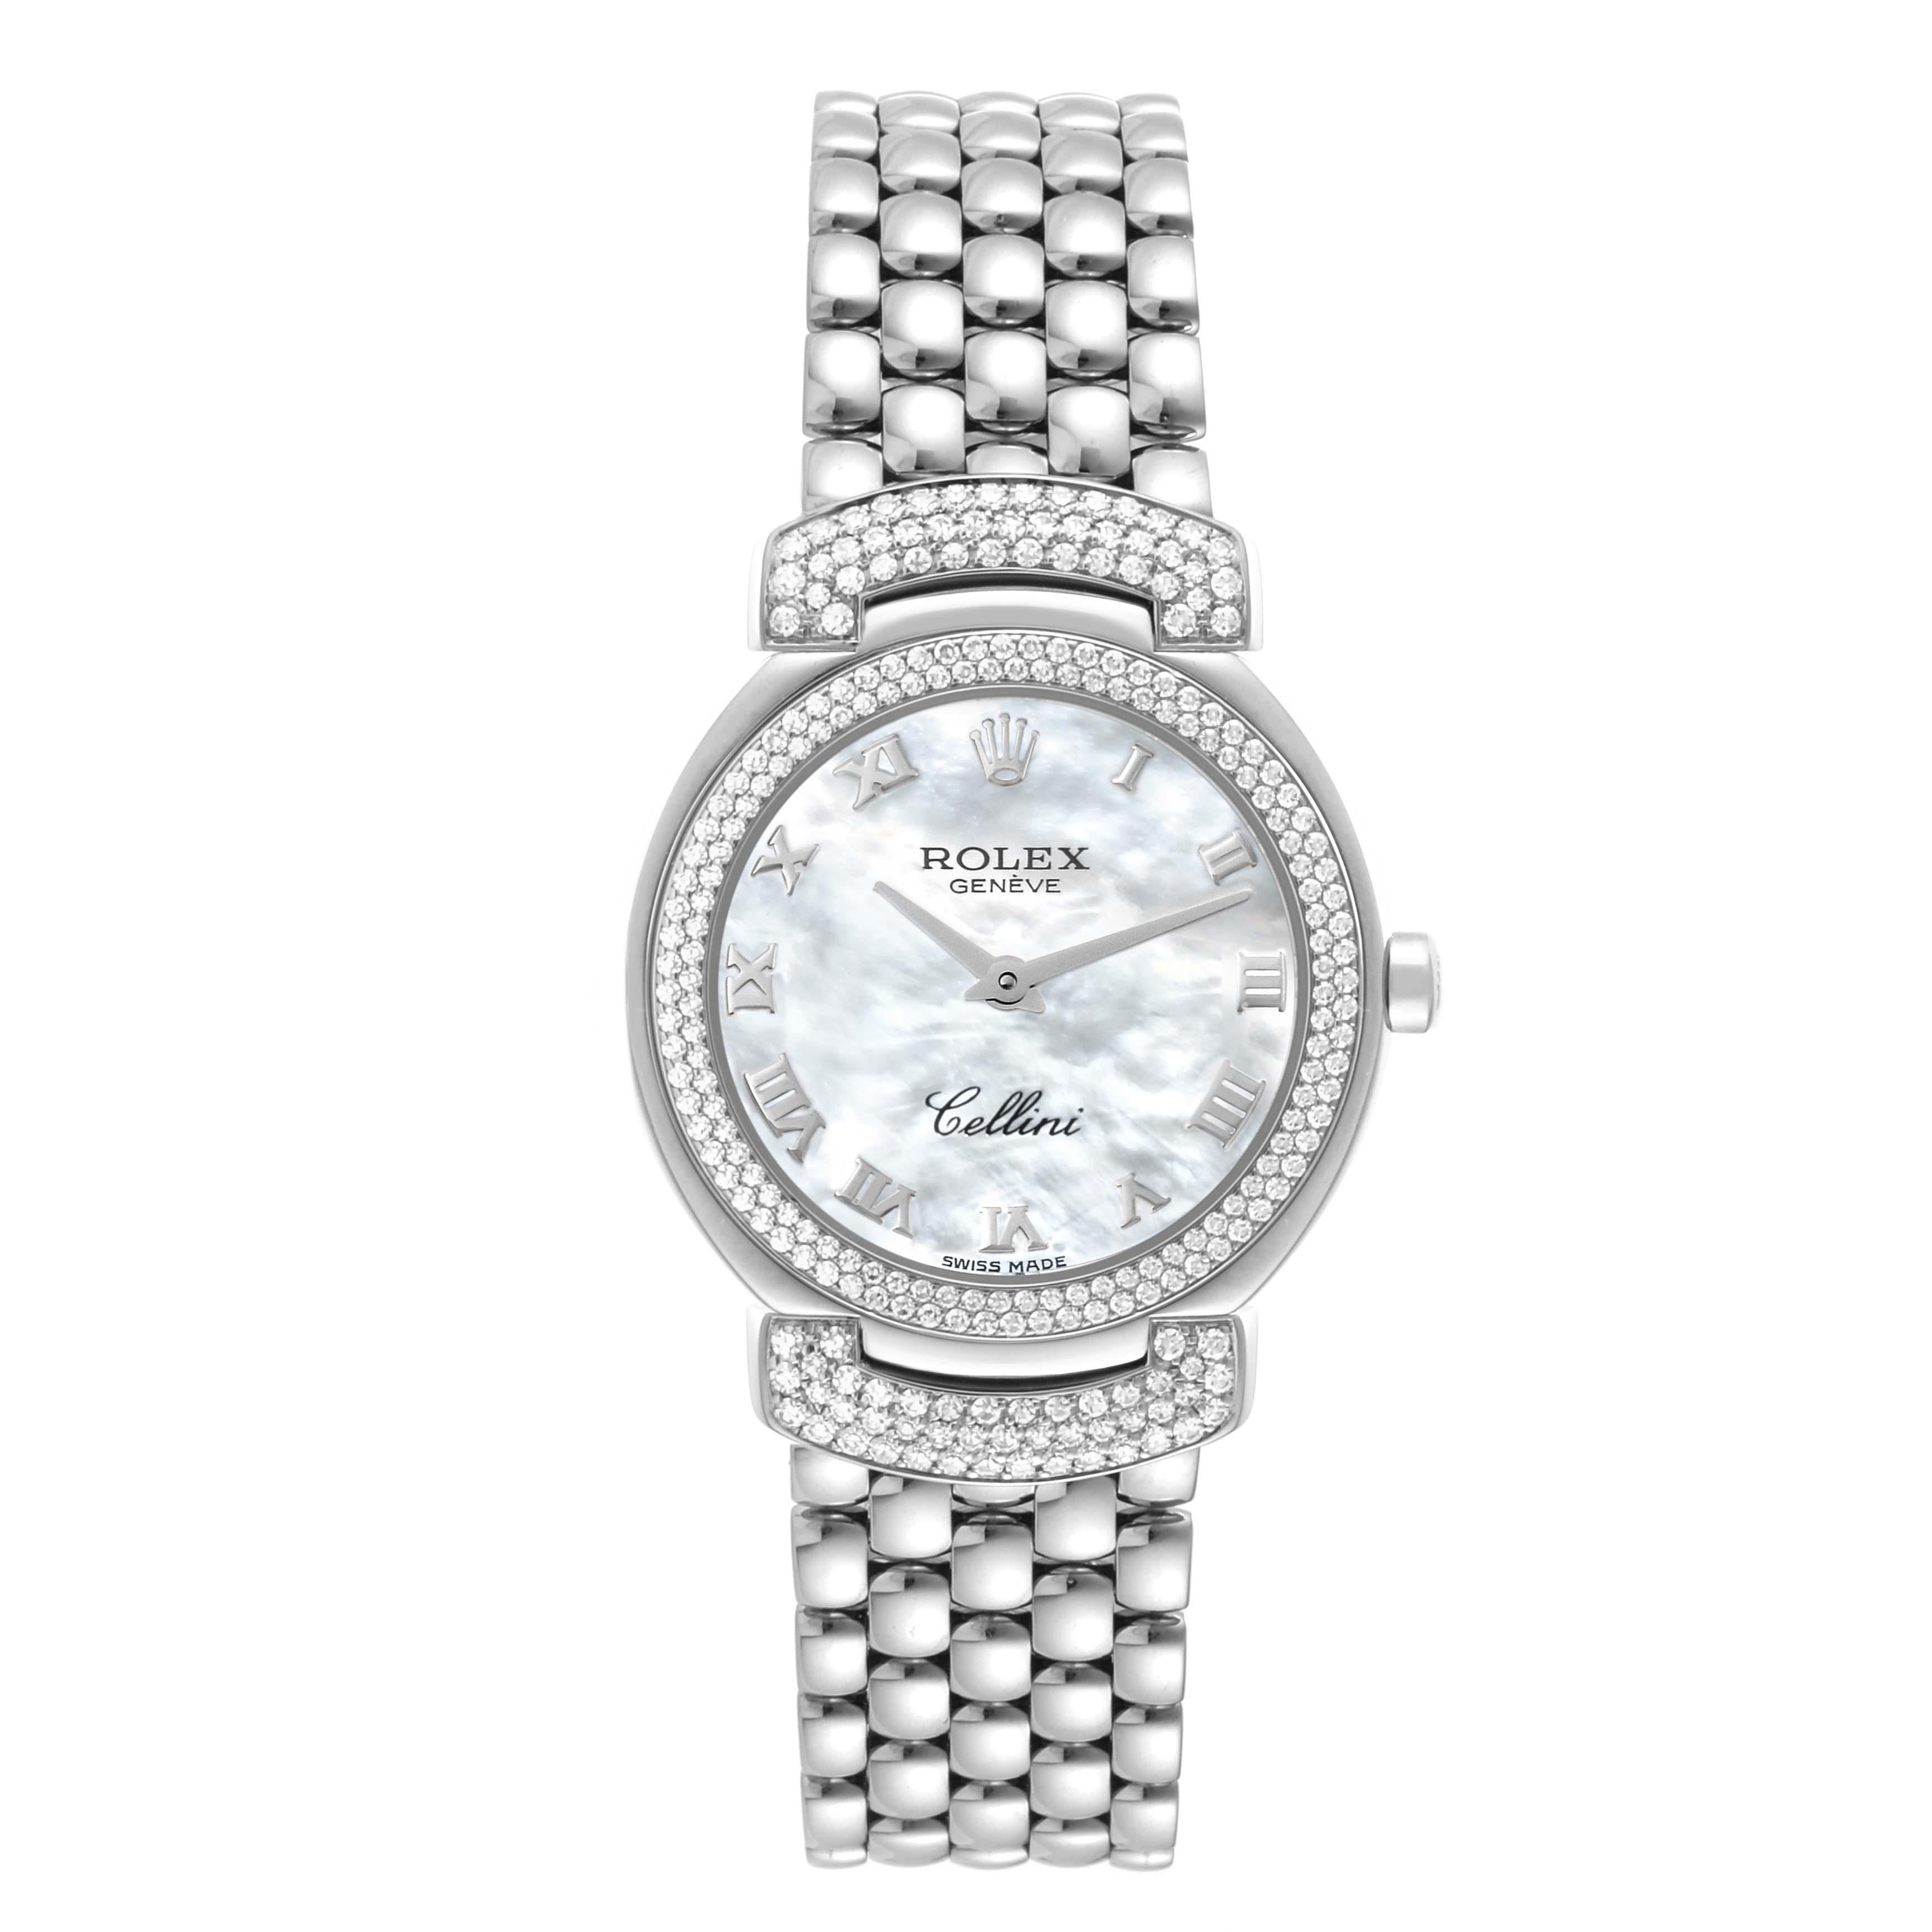 Rolex Cellini Cellissima White Gold Mother Of Pearl Dial Diamond Ladies Watch For Sale 2